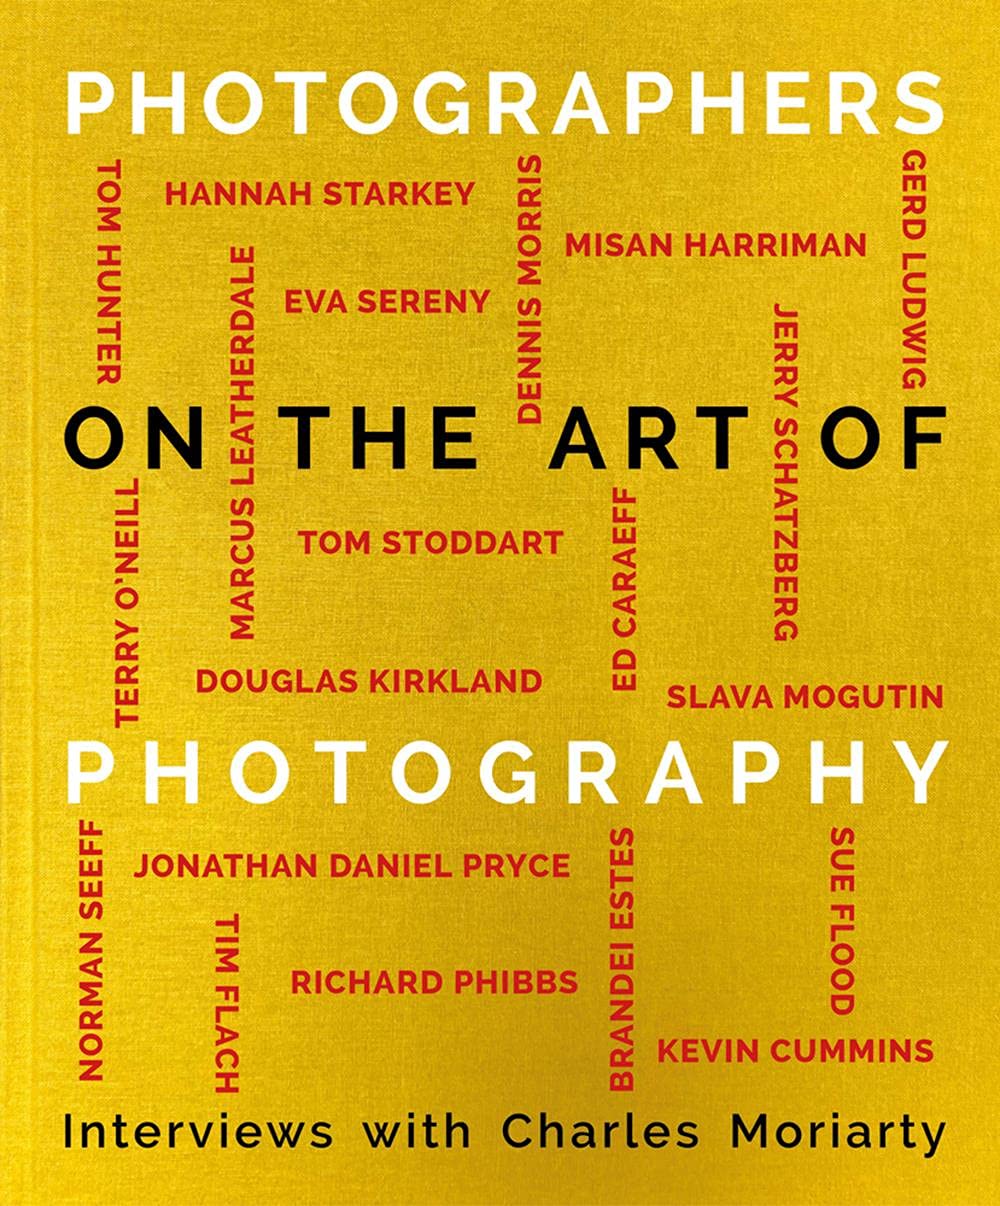 Photographers on the Art of Photography | Charles Moriarty